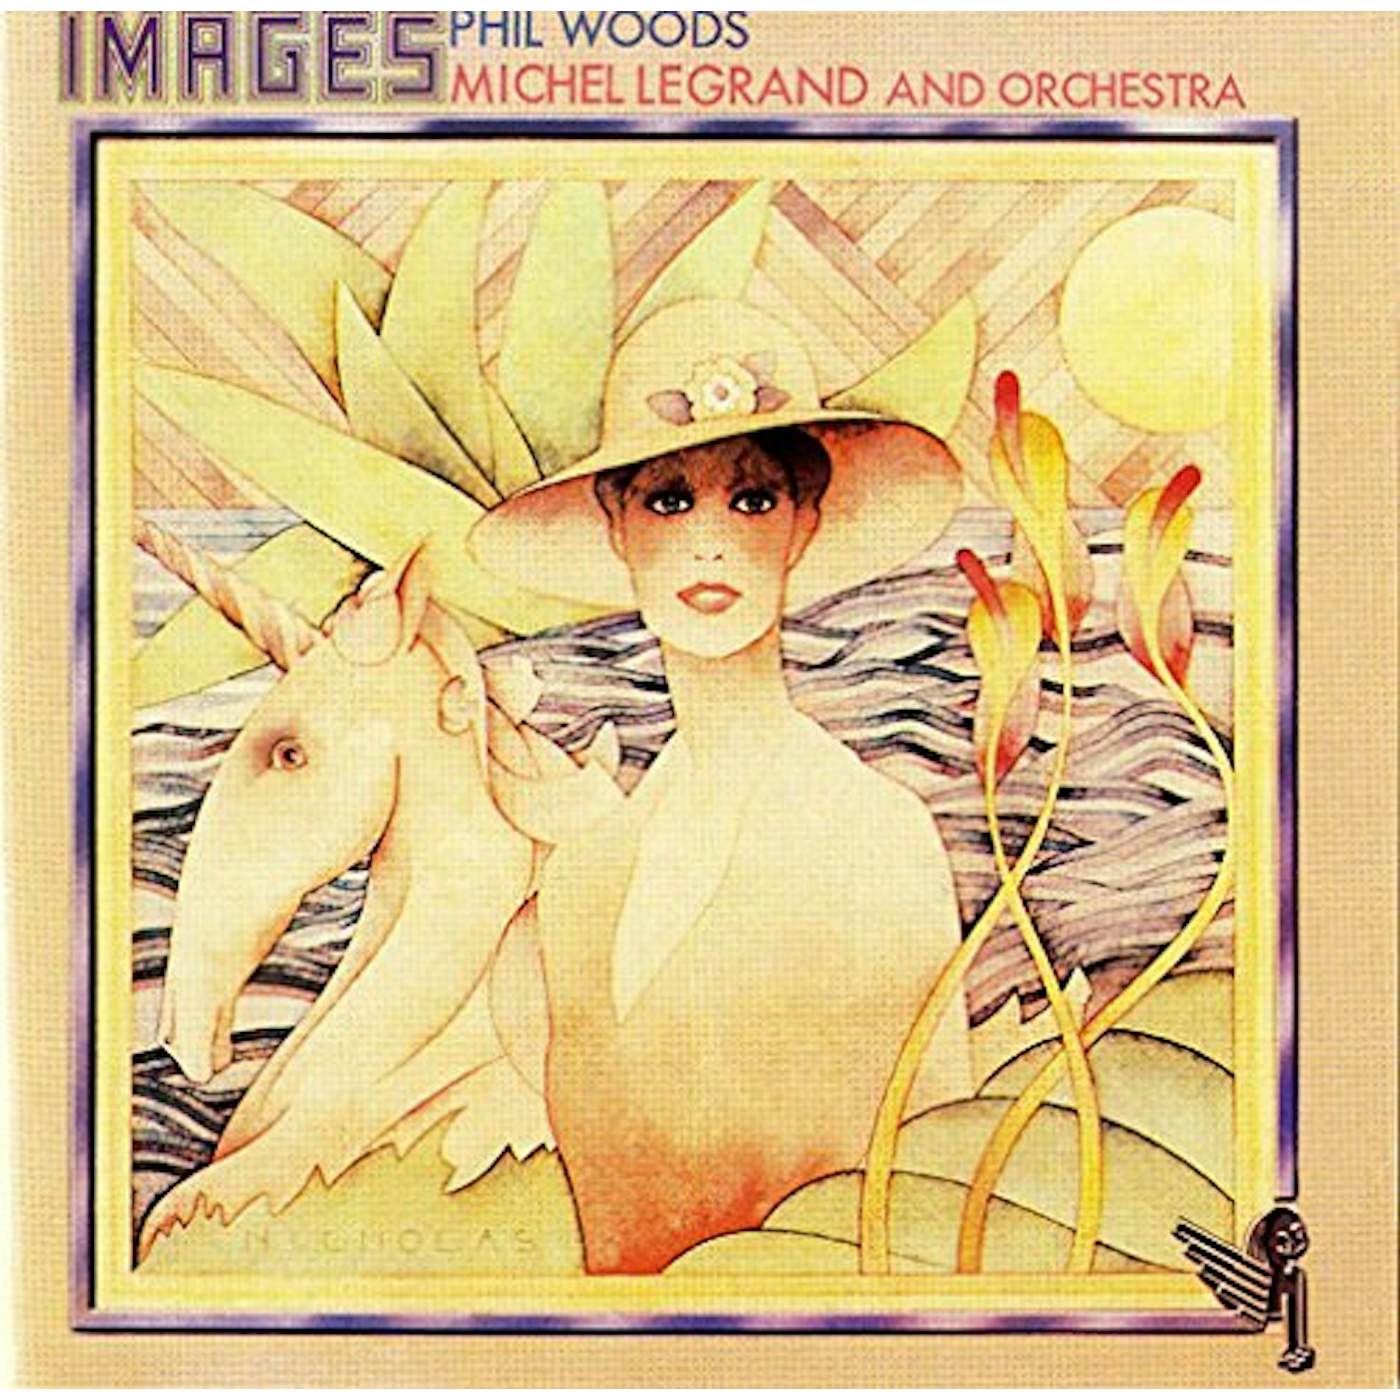 Phil Woods IMAGES: LIMITED EDITION CD